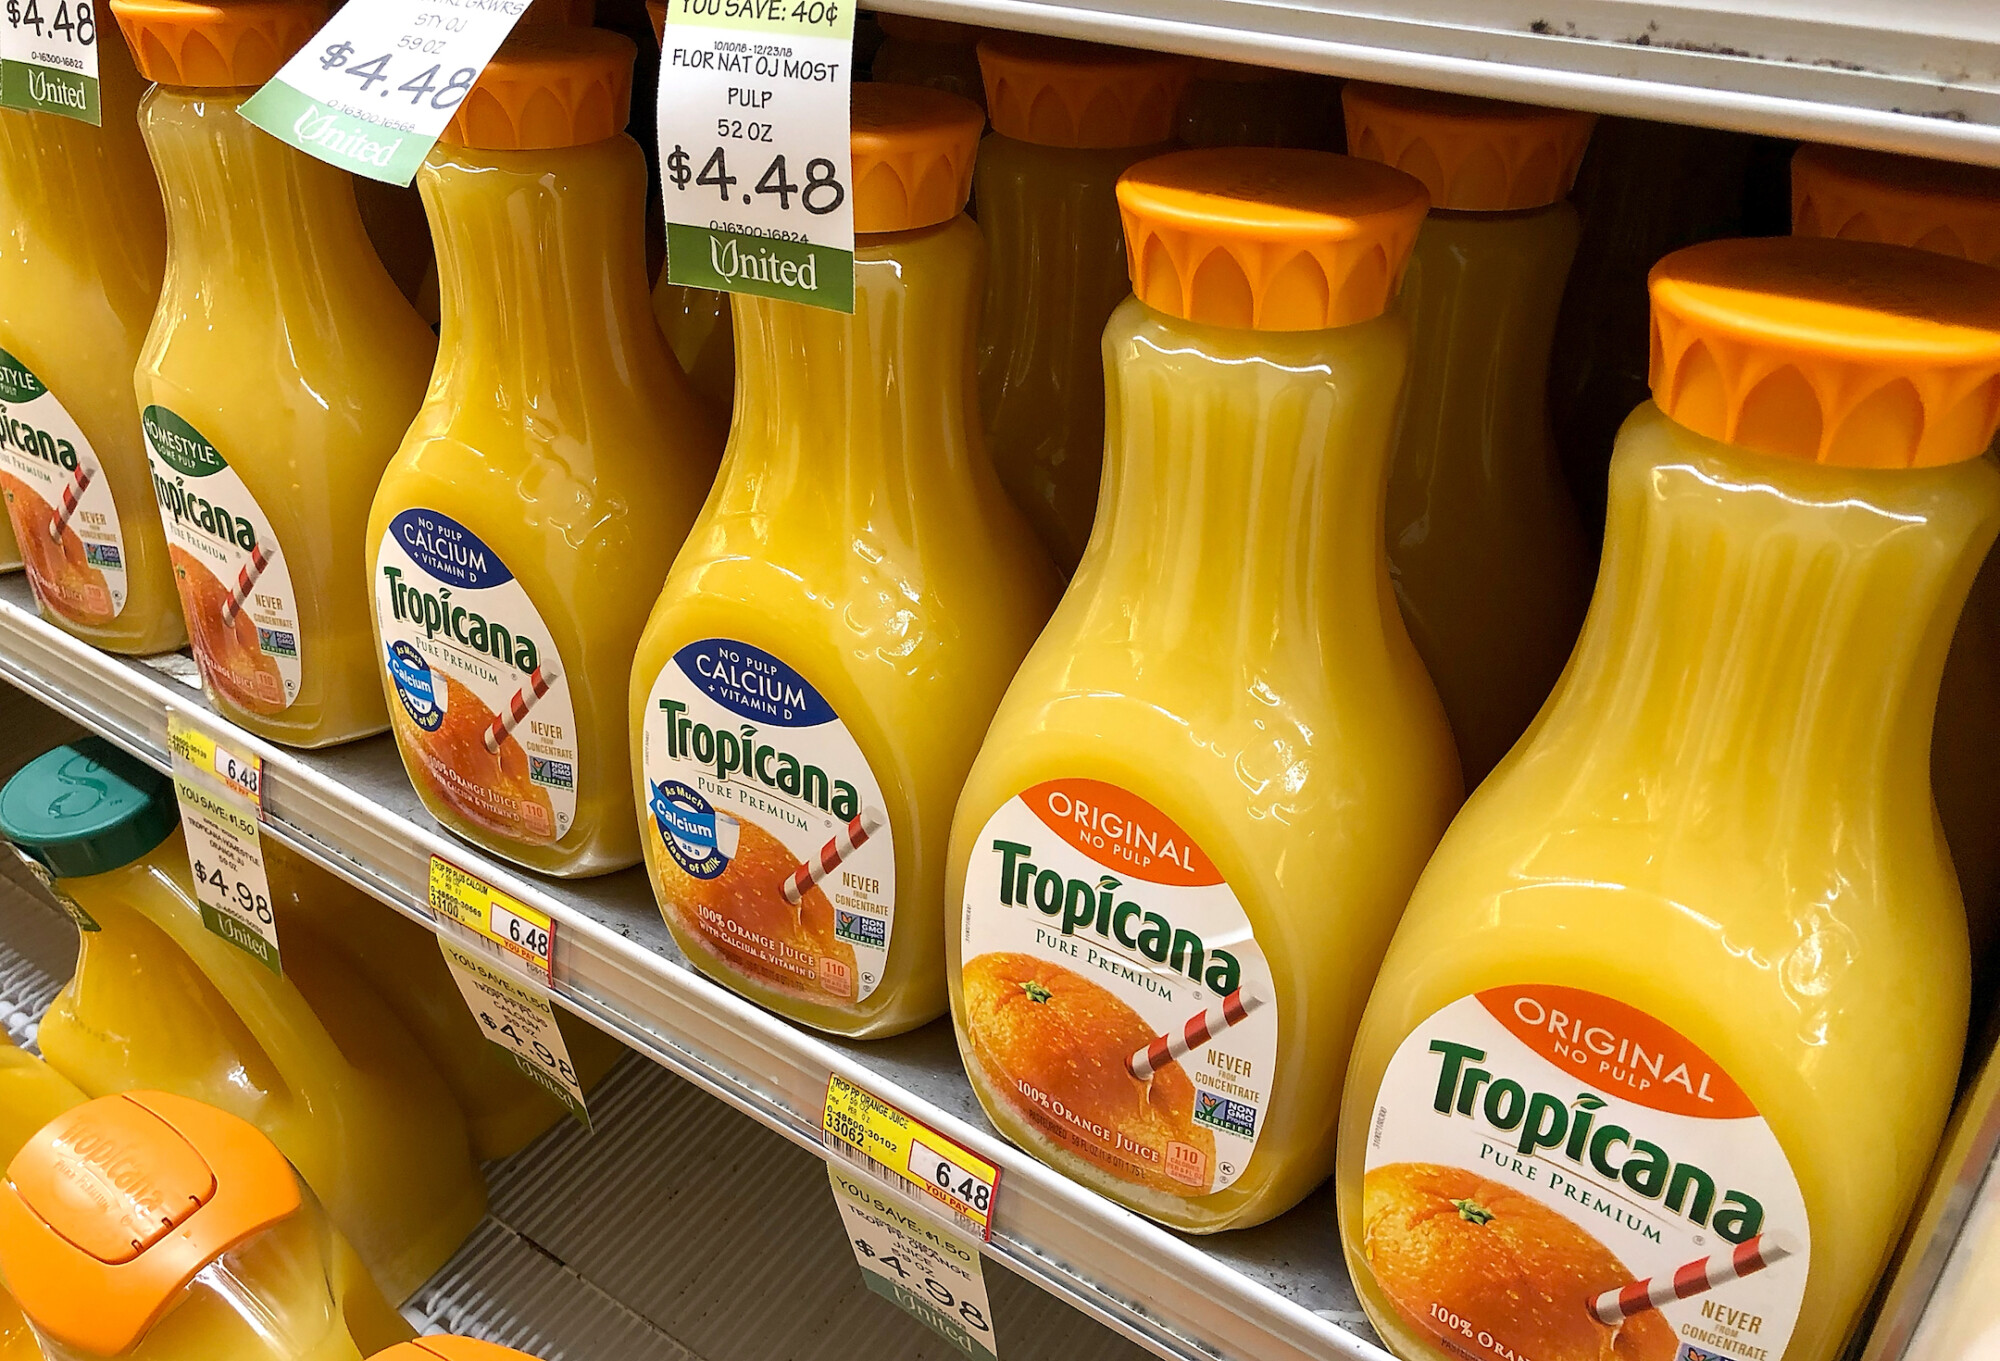 PepsiCo to Sell Tropicana, Other Juice Brands for $3.3 Billion